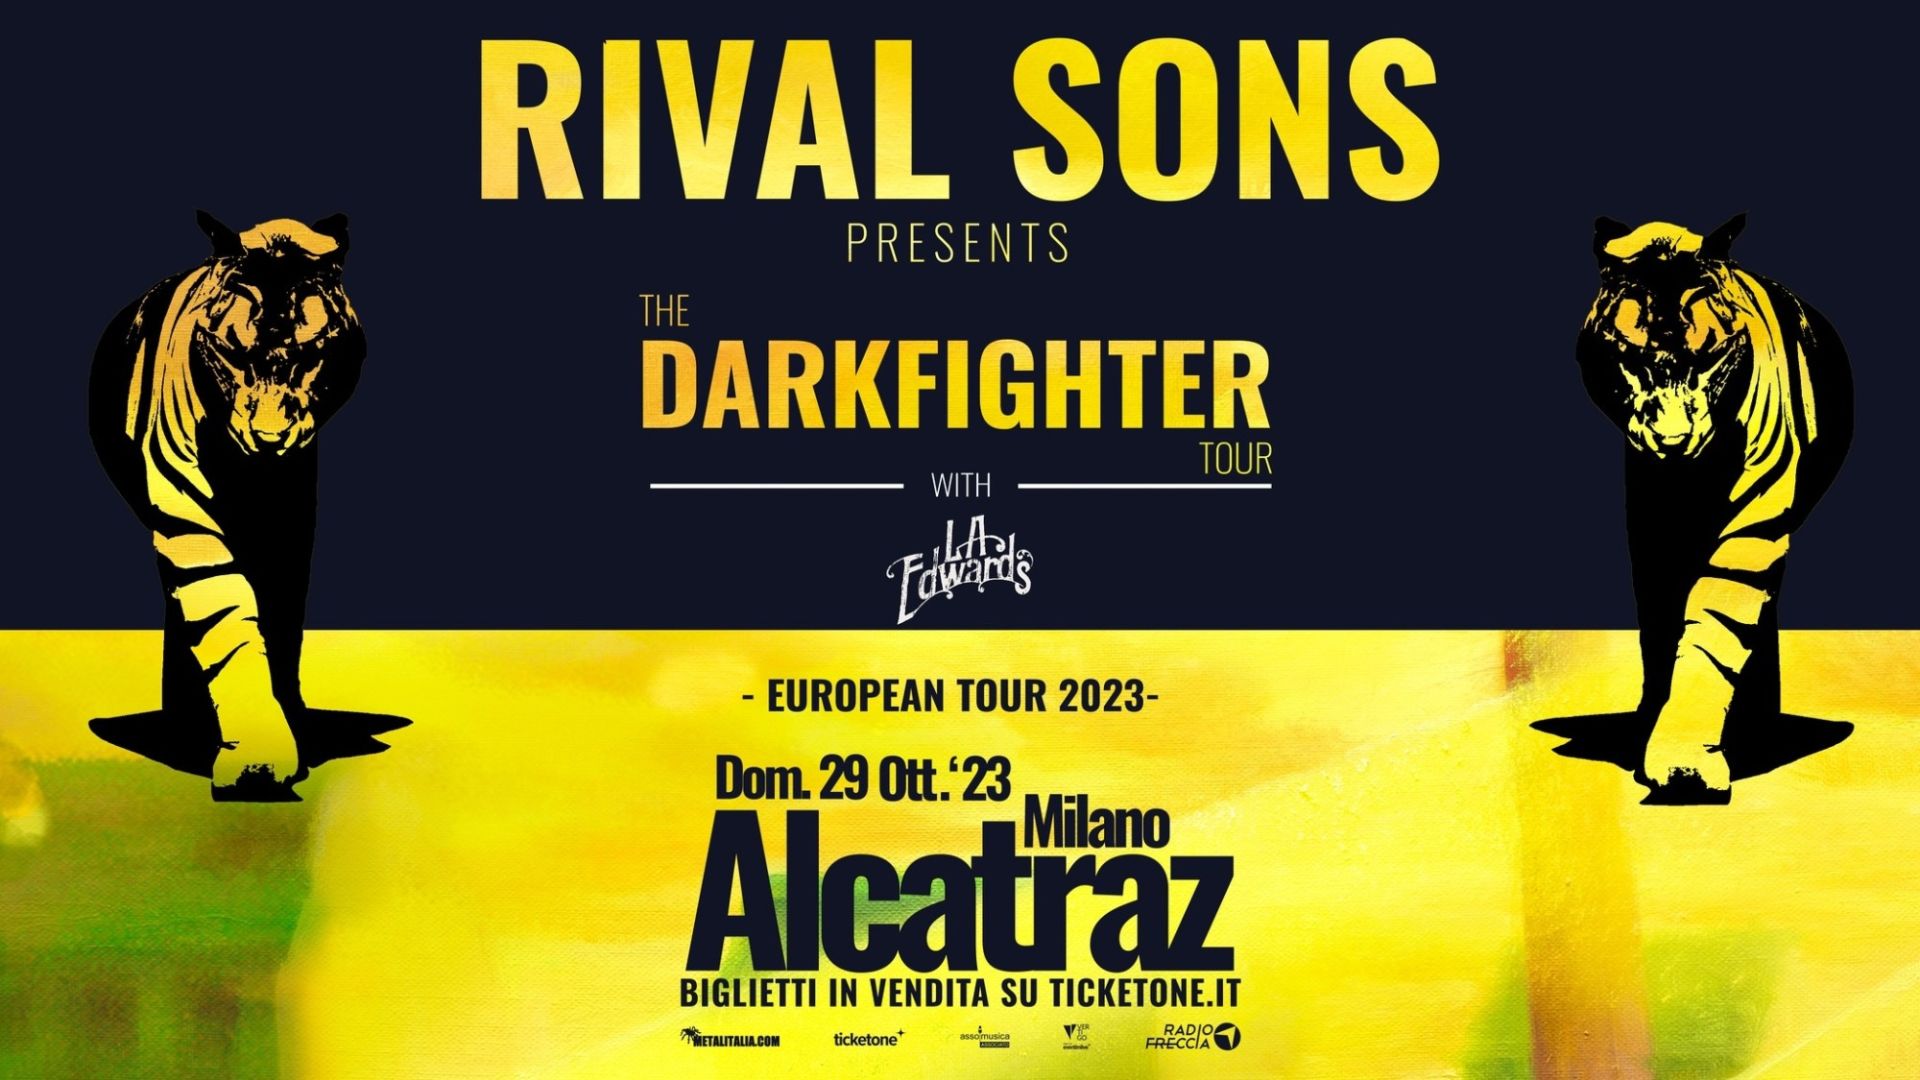 Rival Sons - “The Darkfighter Tour”